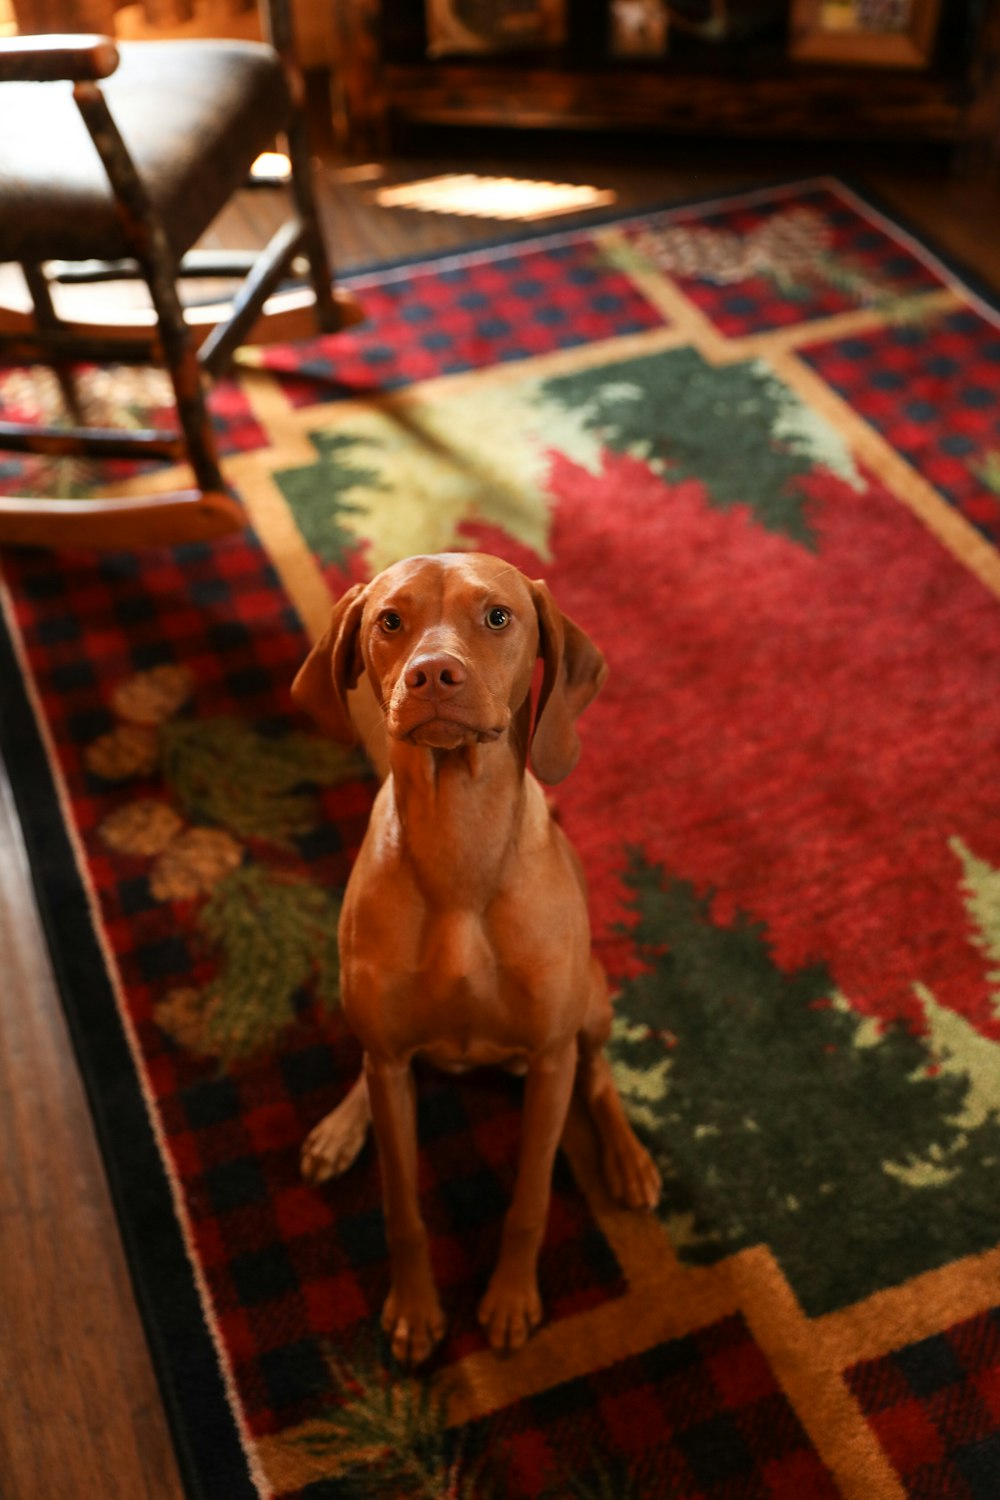 brown short coated dog on red and green area rug